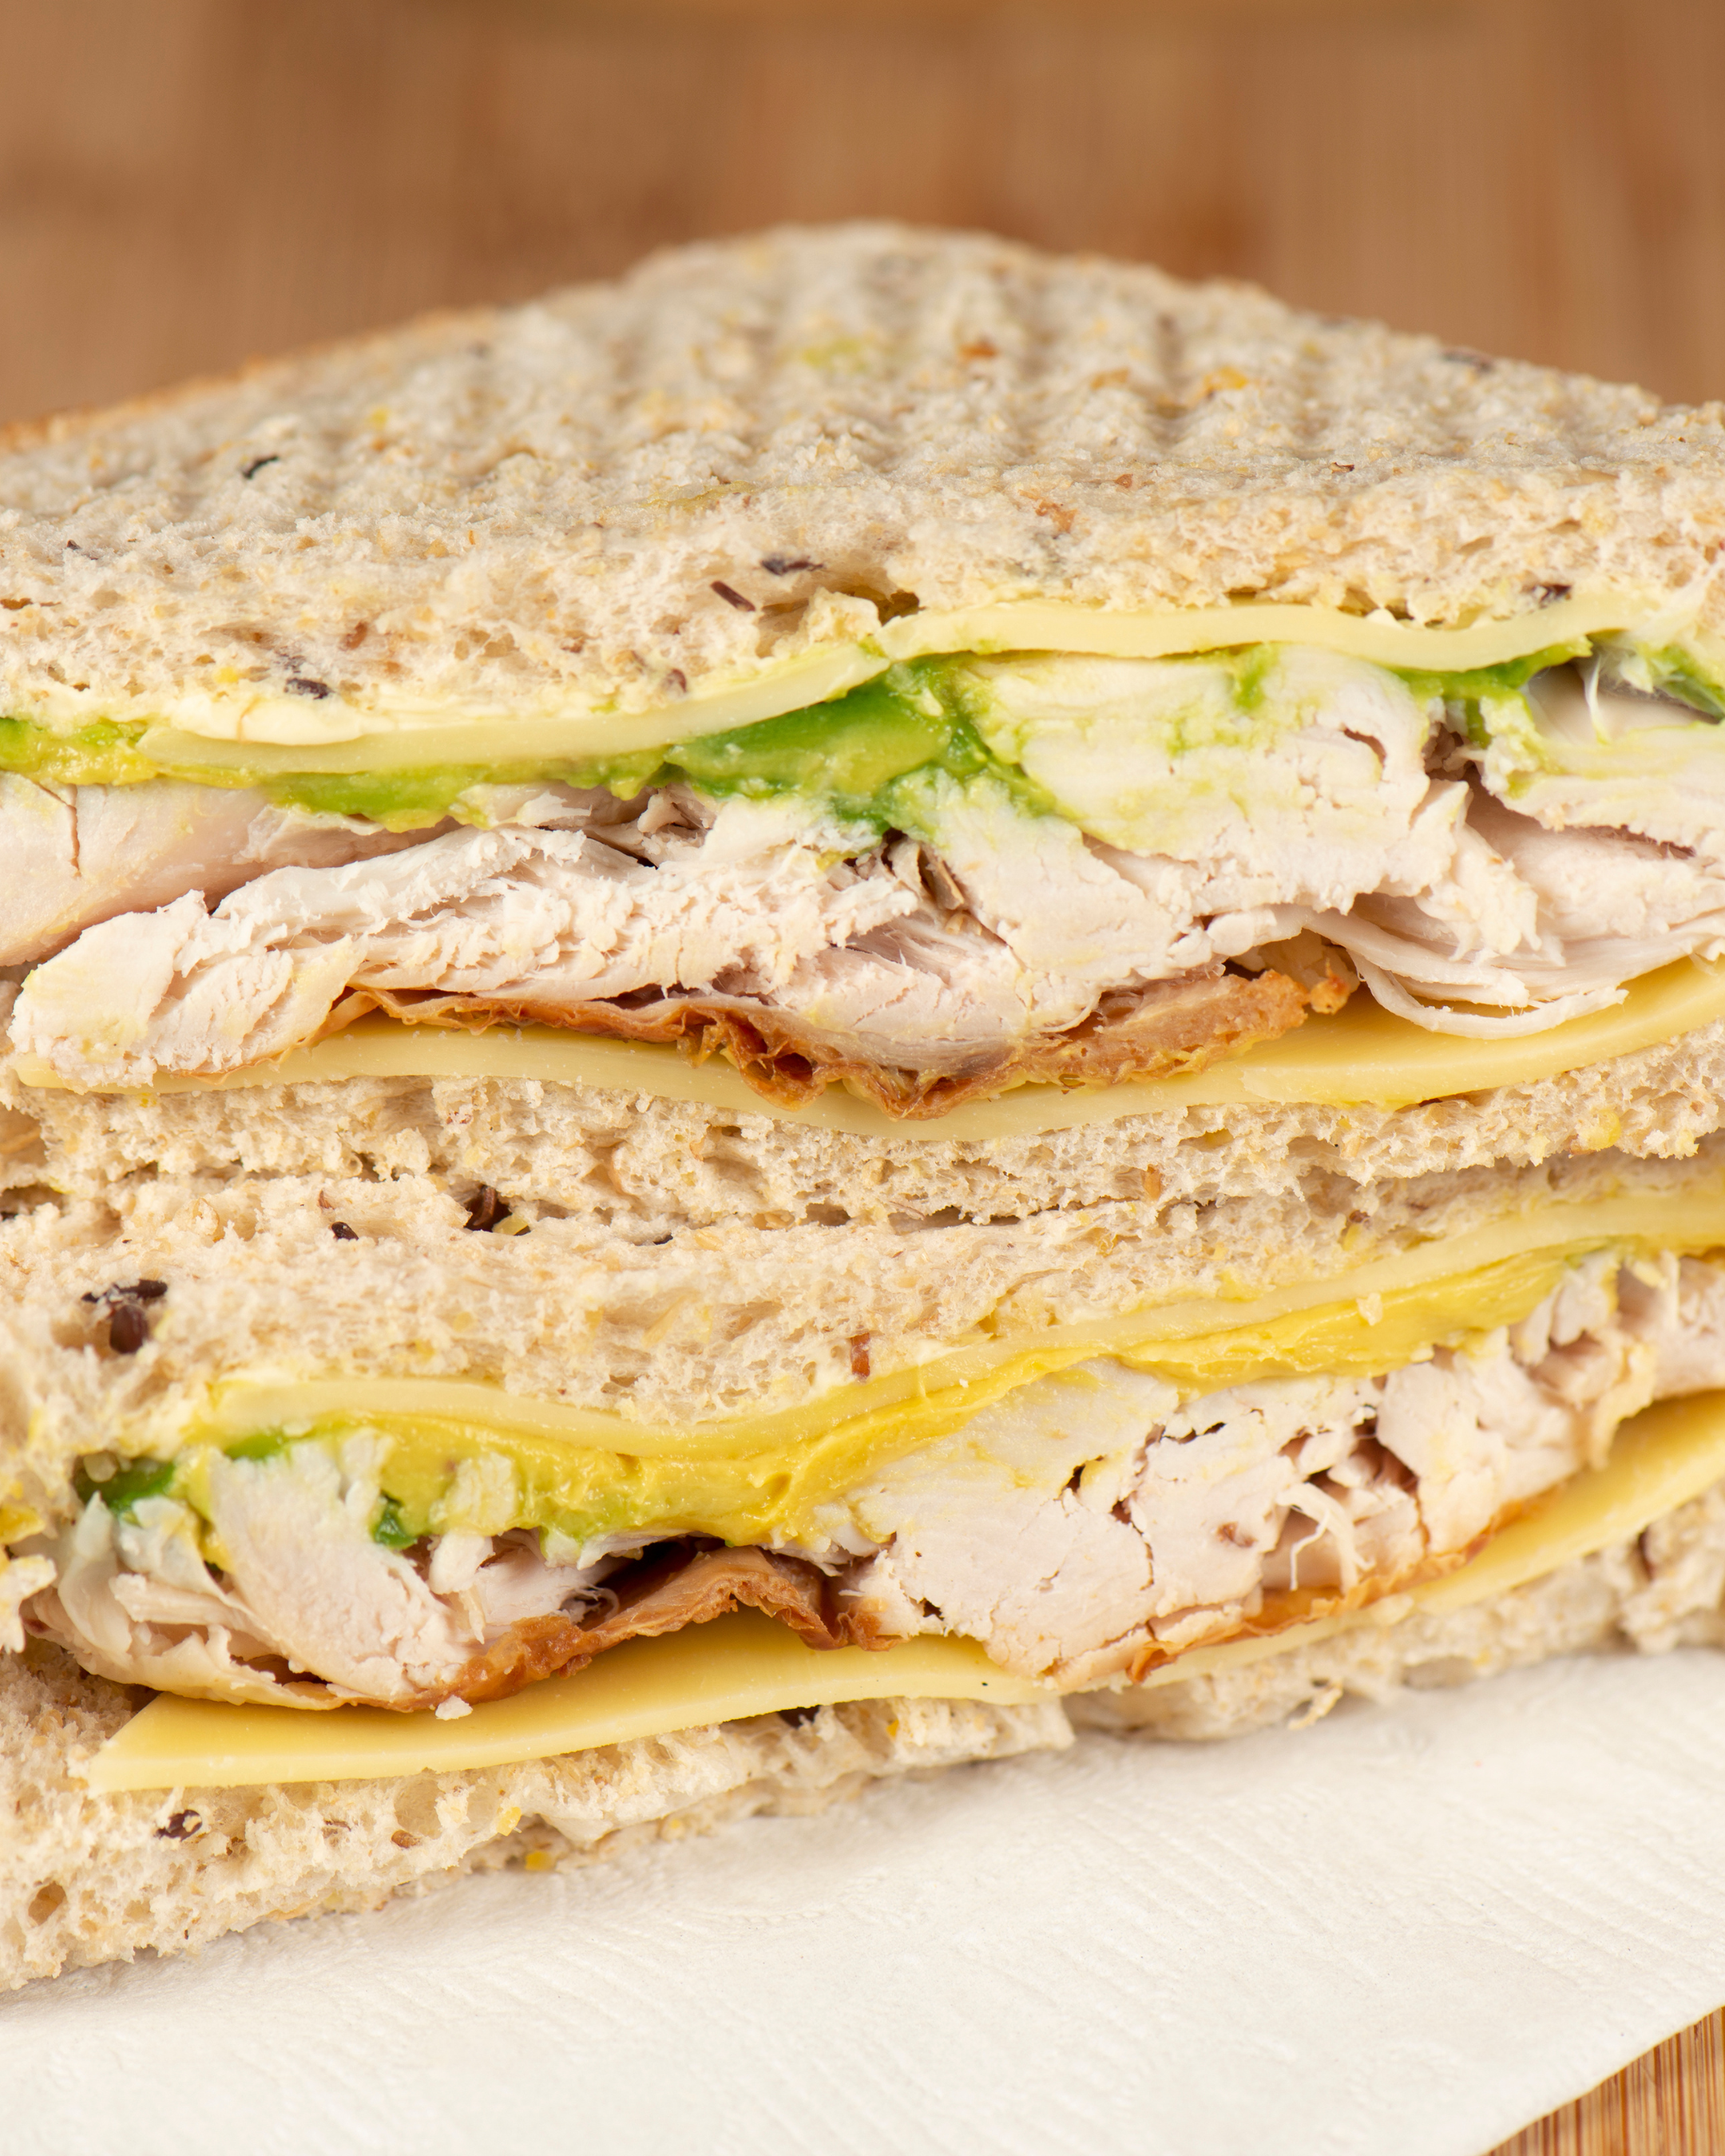 Chicken sandwiches – gatherings, picnics, lunches!